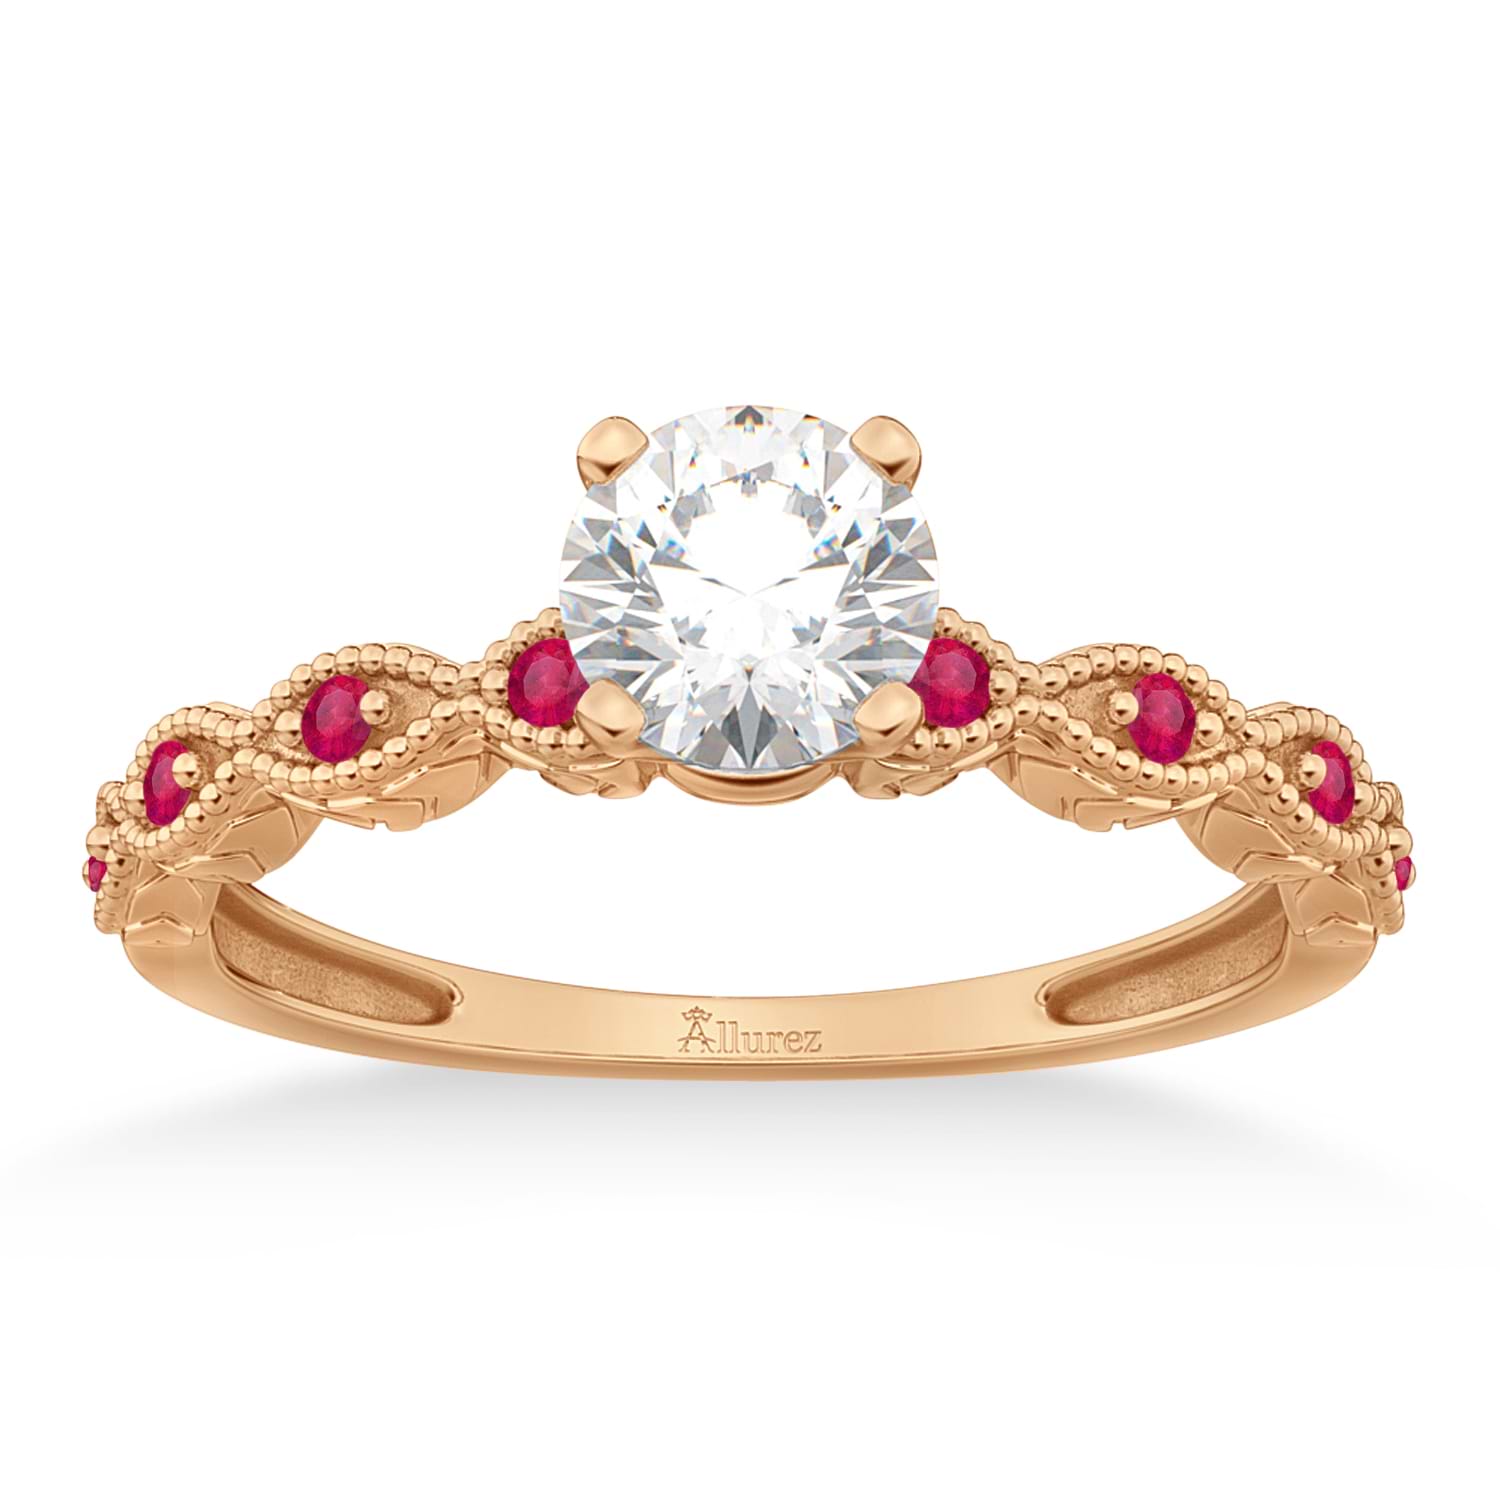 Vintage Marquise Ruby Engagement Ring 14k Rose Gold (0.18ct)